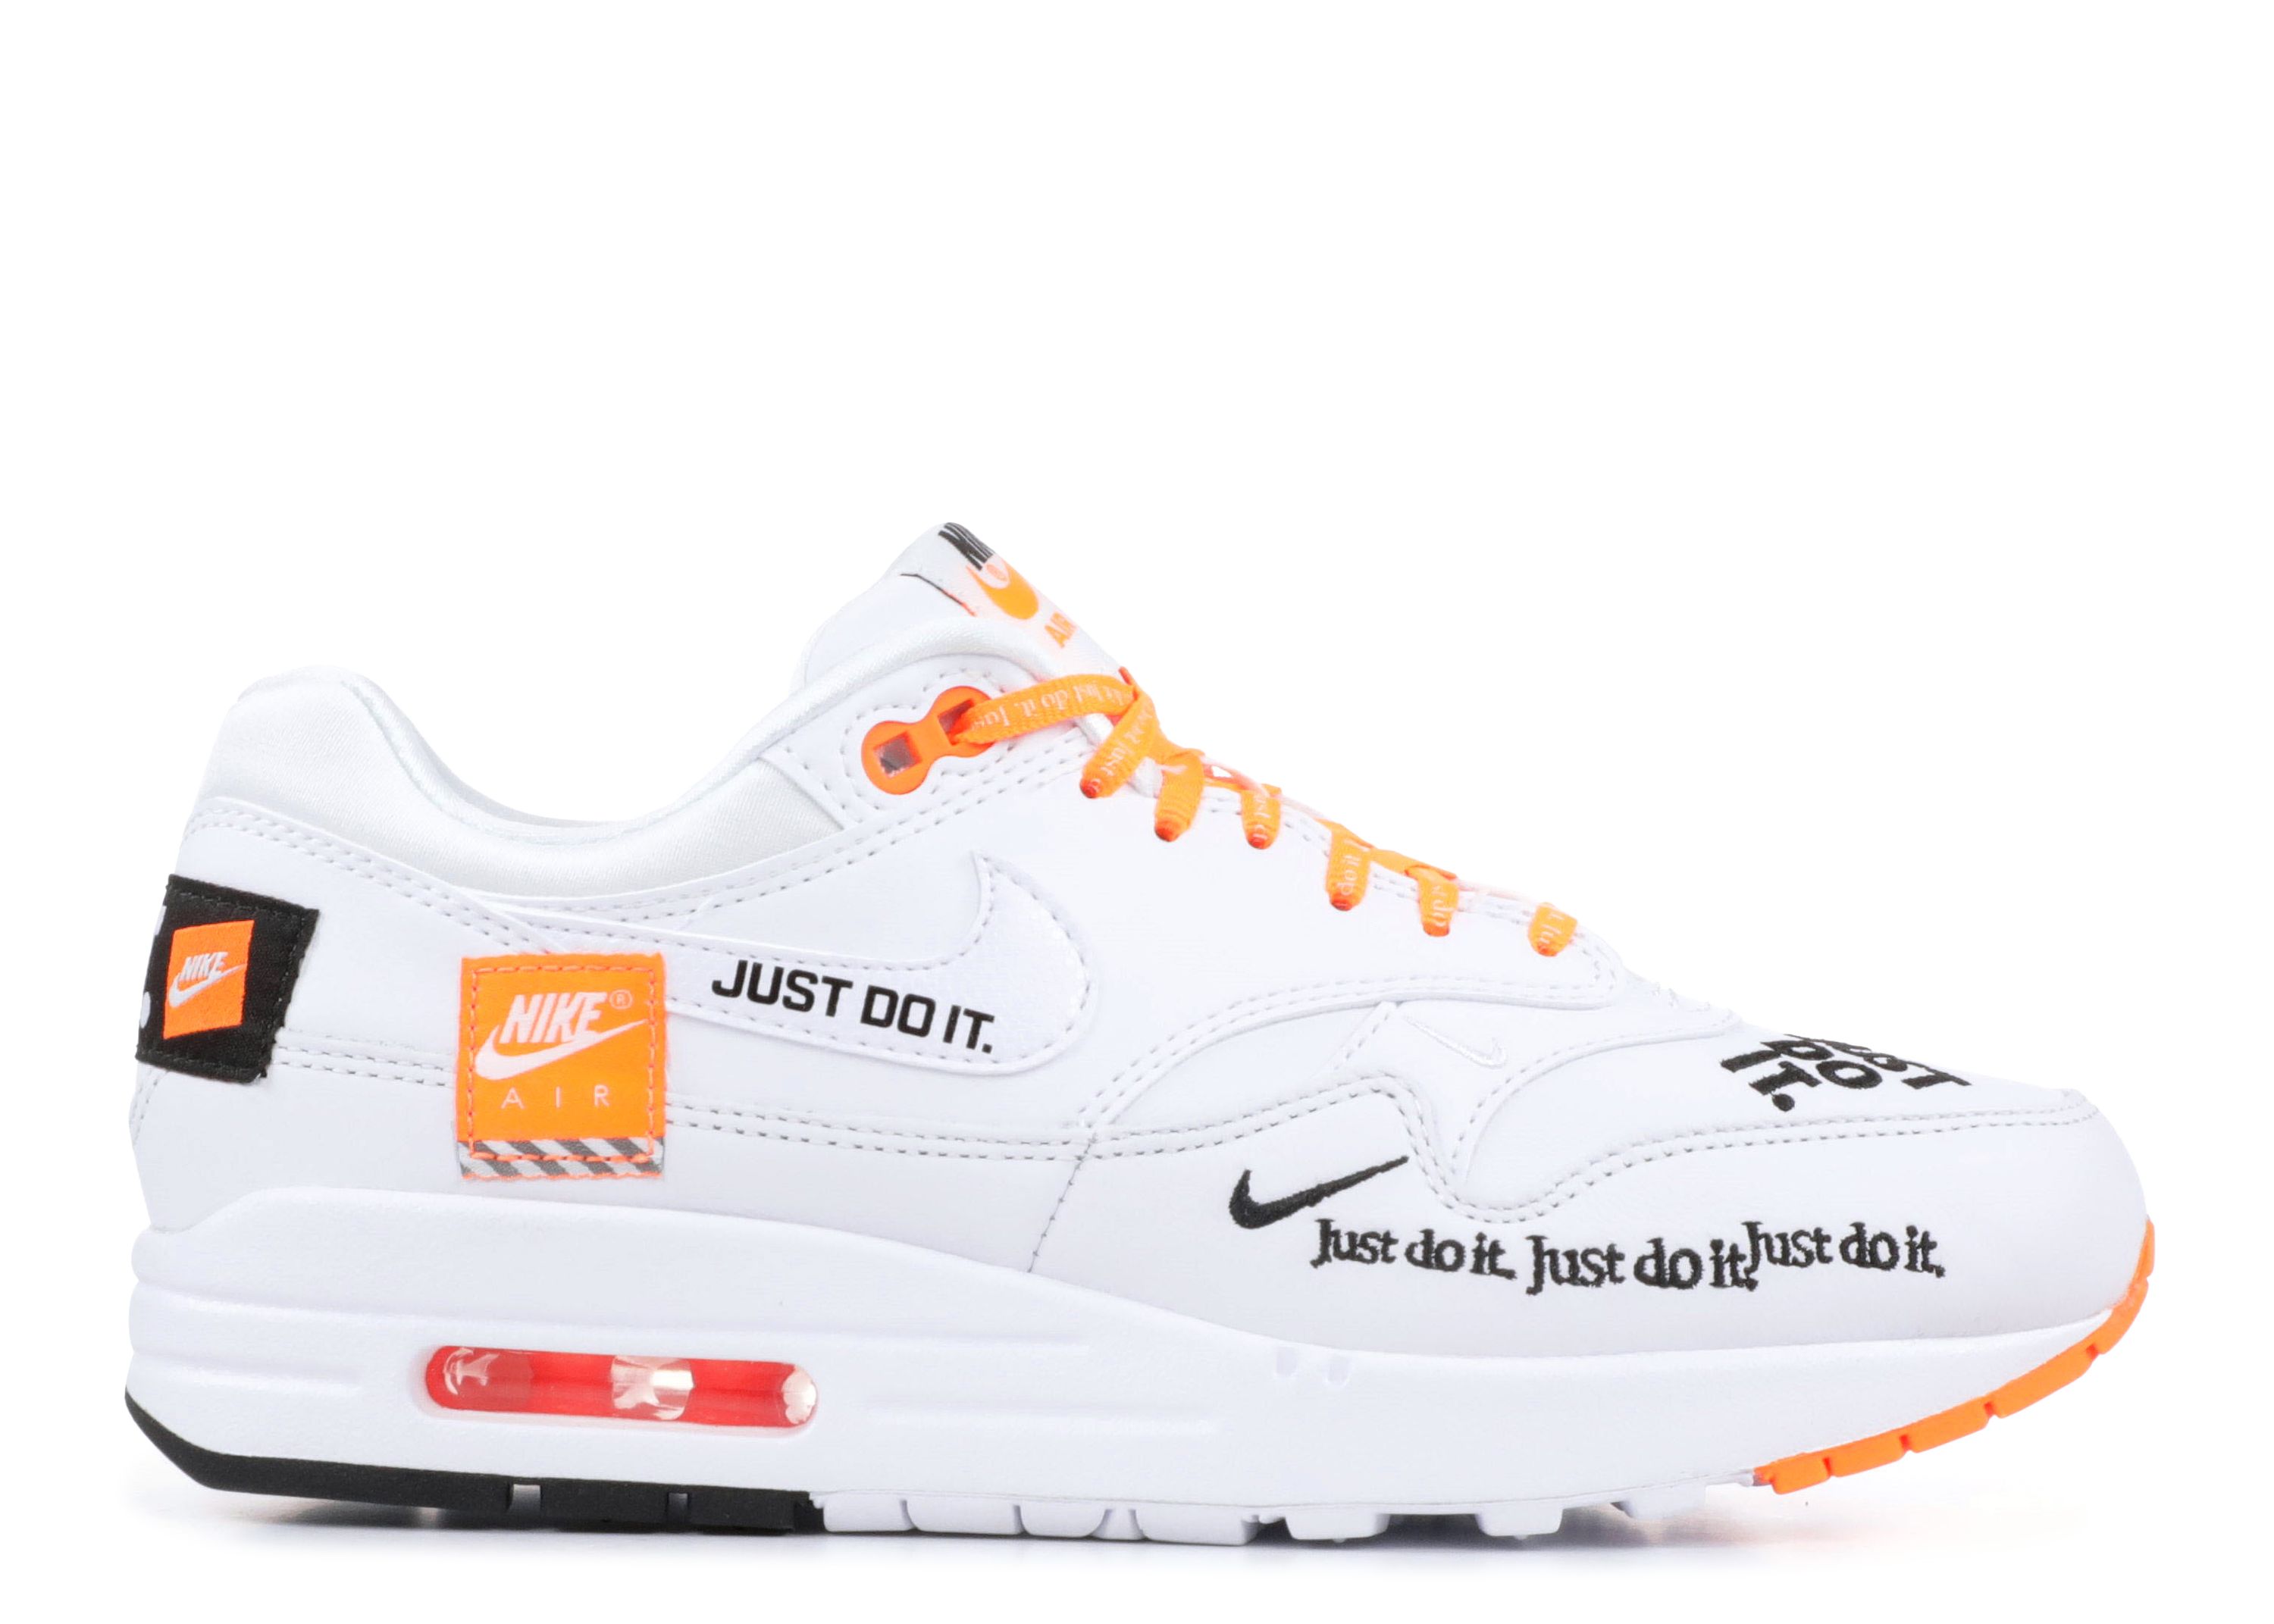 Wmns Air Max 1 LX 'Just Do It' - Nike - 917691 100 - white/black/total ...